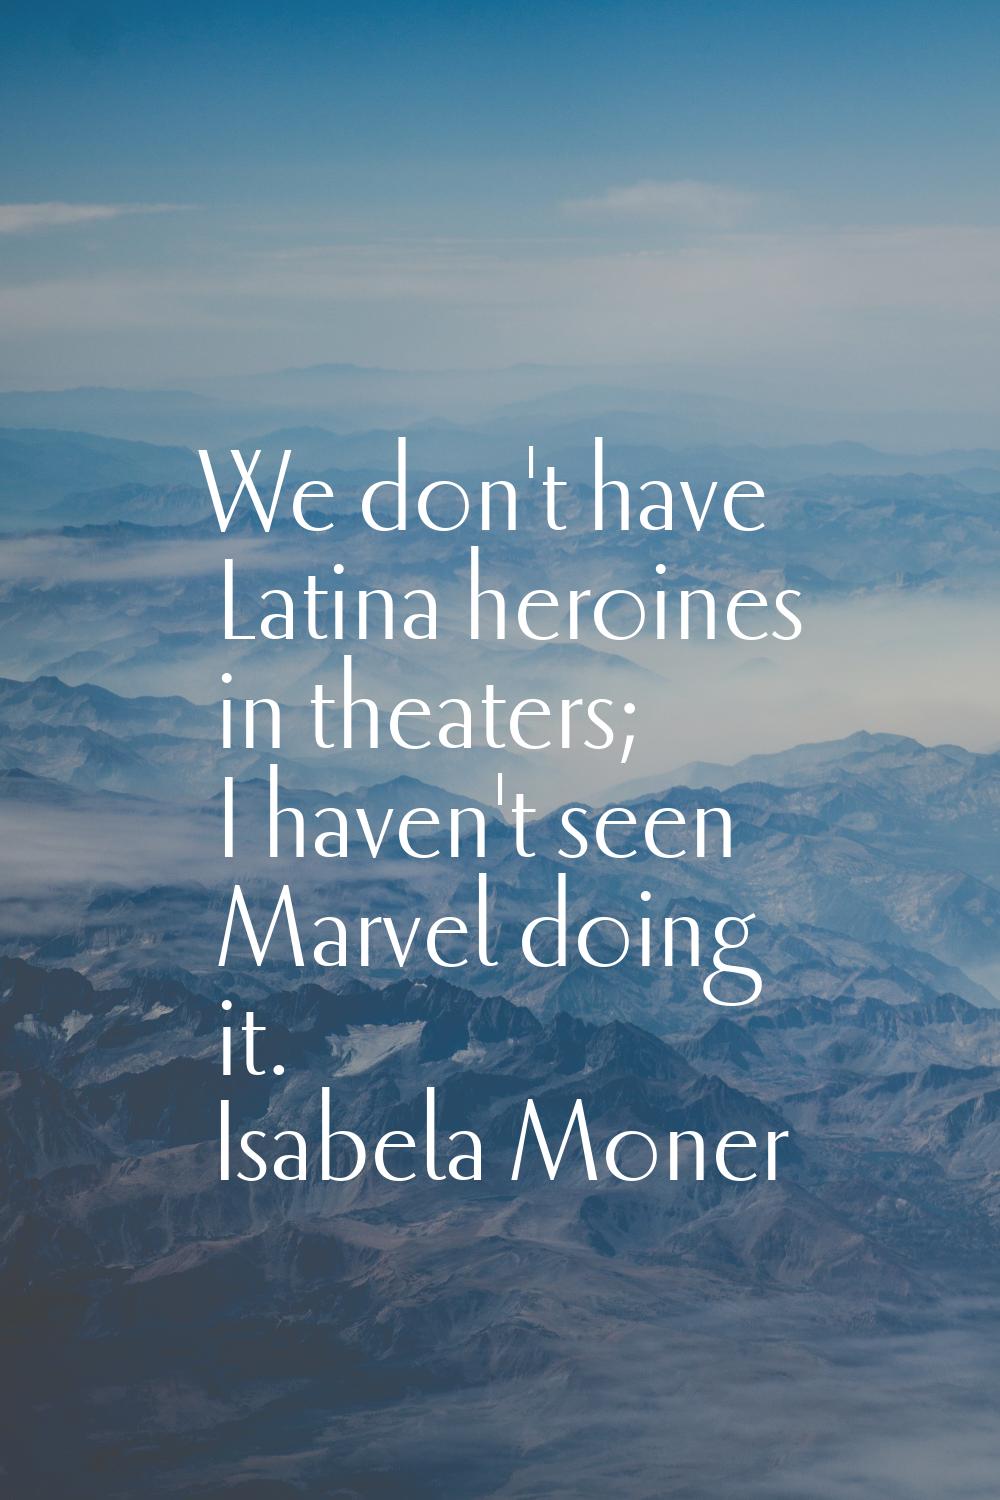 We don't have Latina heroines in theaters; I haven't seen Marvel doing it.